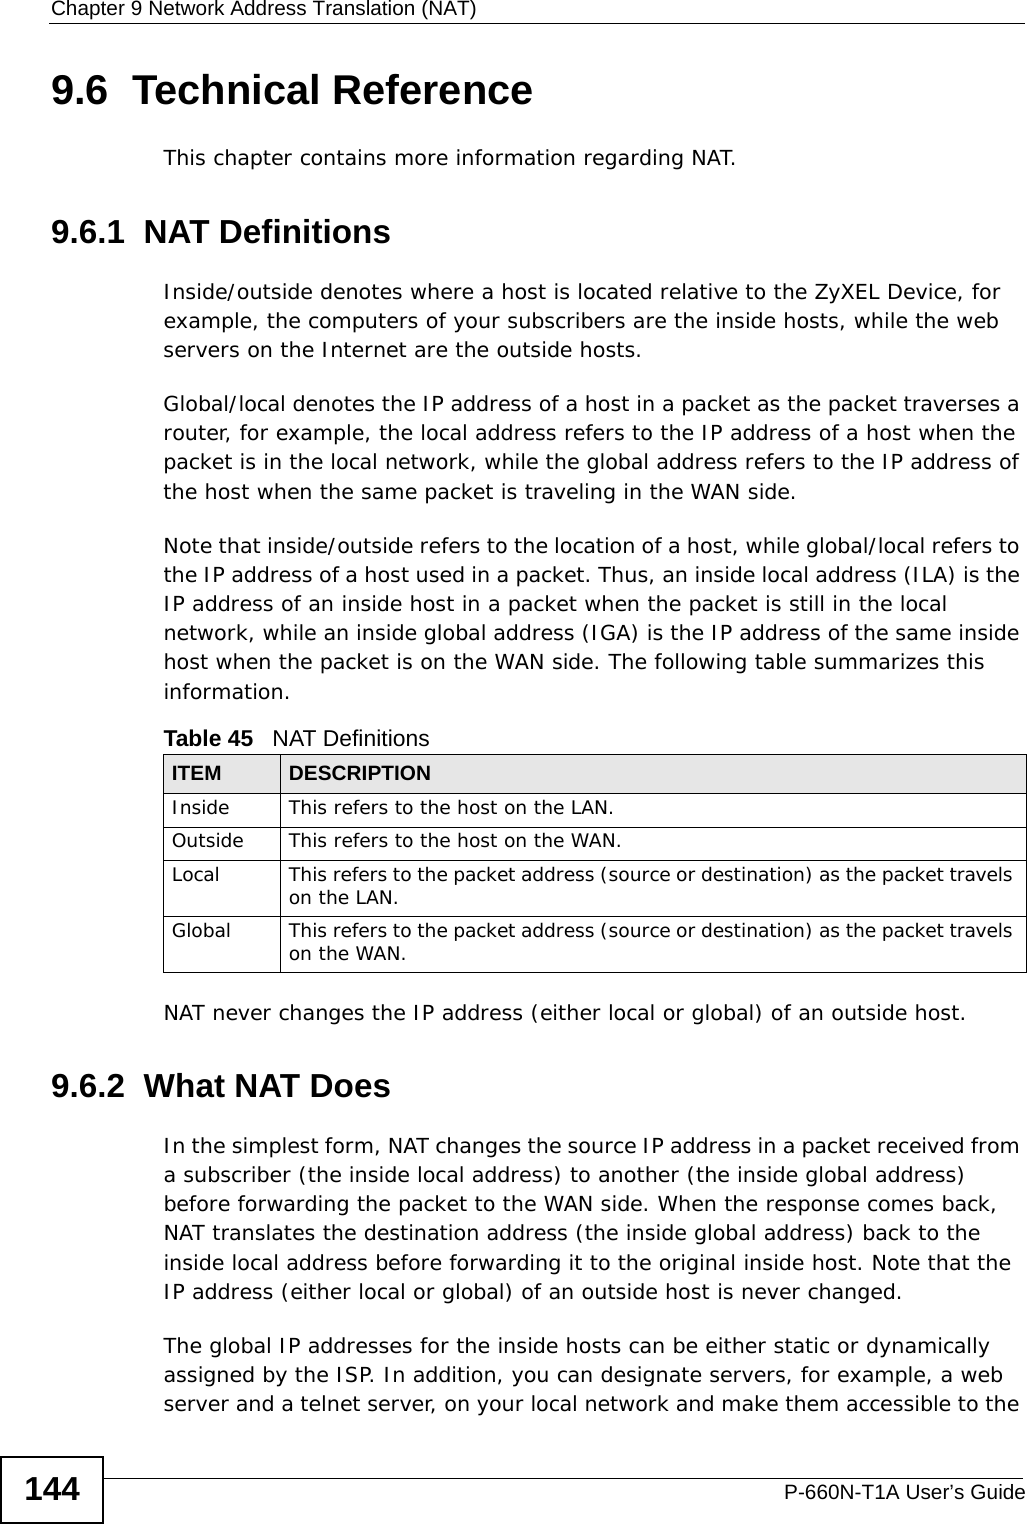 Chapter 9 Network Address Translation (NAT)P-660N-T1A User’s Guide1449.6  Technical ReferenceThis chapter contains more information regarding NAT.9.6.1  NAT DefinitionsInside/outside denotes where a host is located relative to the ZyXEL Device, for example, the computers of your subscribers are the inside hosts, while the web servers on the Internet are the outside hosts. Global/local denotes the IP address of a host in a packet as the packet traverses a router, for example, the local address refers to the IP address of a host when the packet is in the local network, while the global address refers to the IP address of the host when the same packet is traveling in the WAN side. Note that inside/outside refers to the location of a host, while global/local refers to the IP address of a host used in a packet. Thus, an inside local address (ILA) is the IP address of an inside host in a packet when the packet is still in the local network, while an inside global address (IGA) is the IP address of the same inside host when the packet is on the WAN side. The following table summarizes this information.NAT never changes the IP address (either local or global) of an outside host.9.6.2  What NAT DoesIn the simplest form, NAT changes the source IP address in a packet received from a subscriber (the inside local address) to another (the inside global address) before forwarding the packet to the WAN side. When the response comes back, NAT translates the destination address (the inside global address) back to the inside local address before forwarding it to the original inside host. Note that the IP address (either local or global) of an outside host is never changed.The global IP addresses for the inside hosts can be either static or dynamically assigned by the ISP. In addition, you can designate servers, for example, a web server and a telnet server, on your local network and make them accessible to the Table 45   NAT DefinitionsITEM DESCRIPTIONInside This refers to the host on the LAN.Outside This refers to the host on the WAN.Local This refers to the packet address (source or destination) as the packet travels on the LAN.Global This refers to the packet address (source or destination) as the packet travels on the WAN.